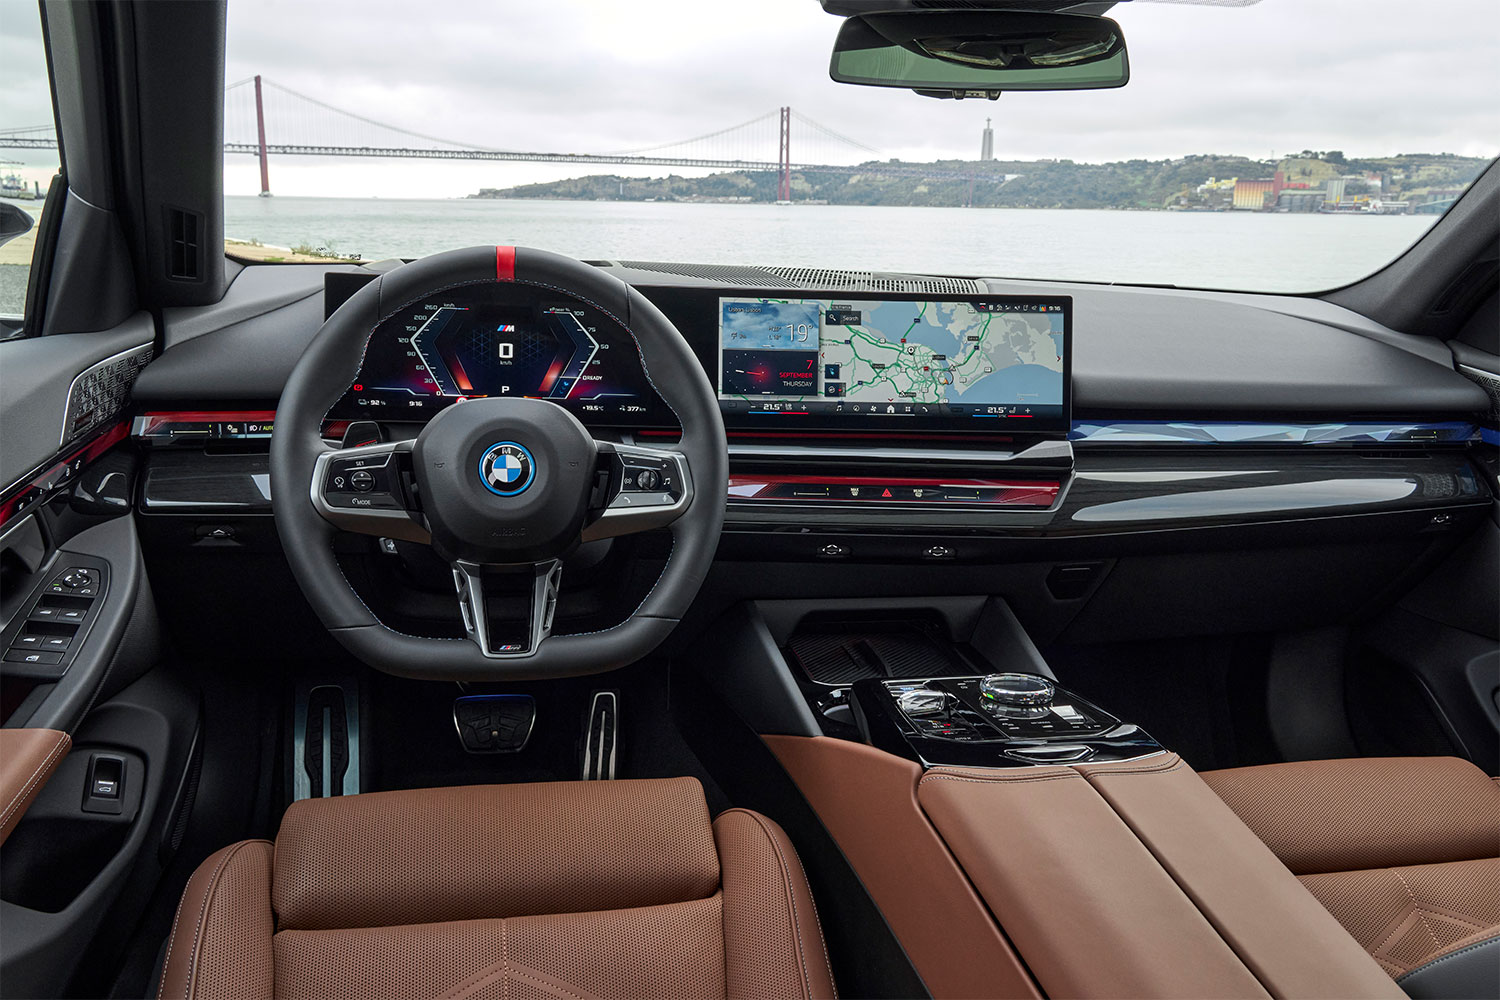 The interior of the BMW i5 M60, showing the dashboard and center console